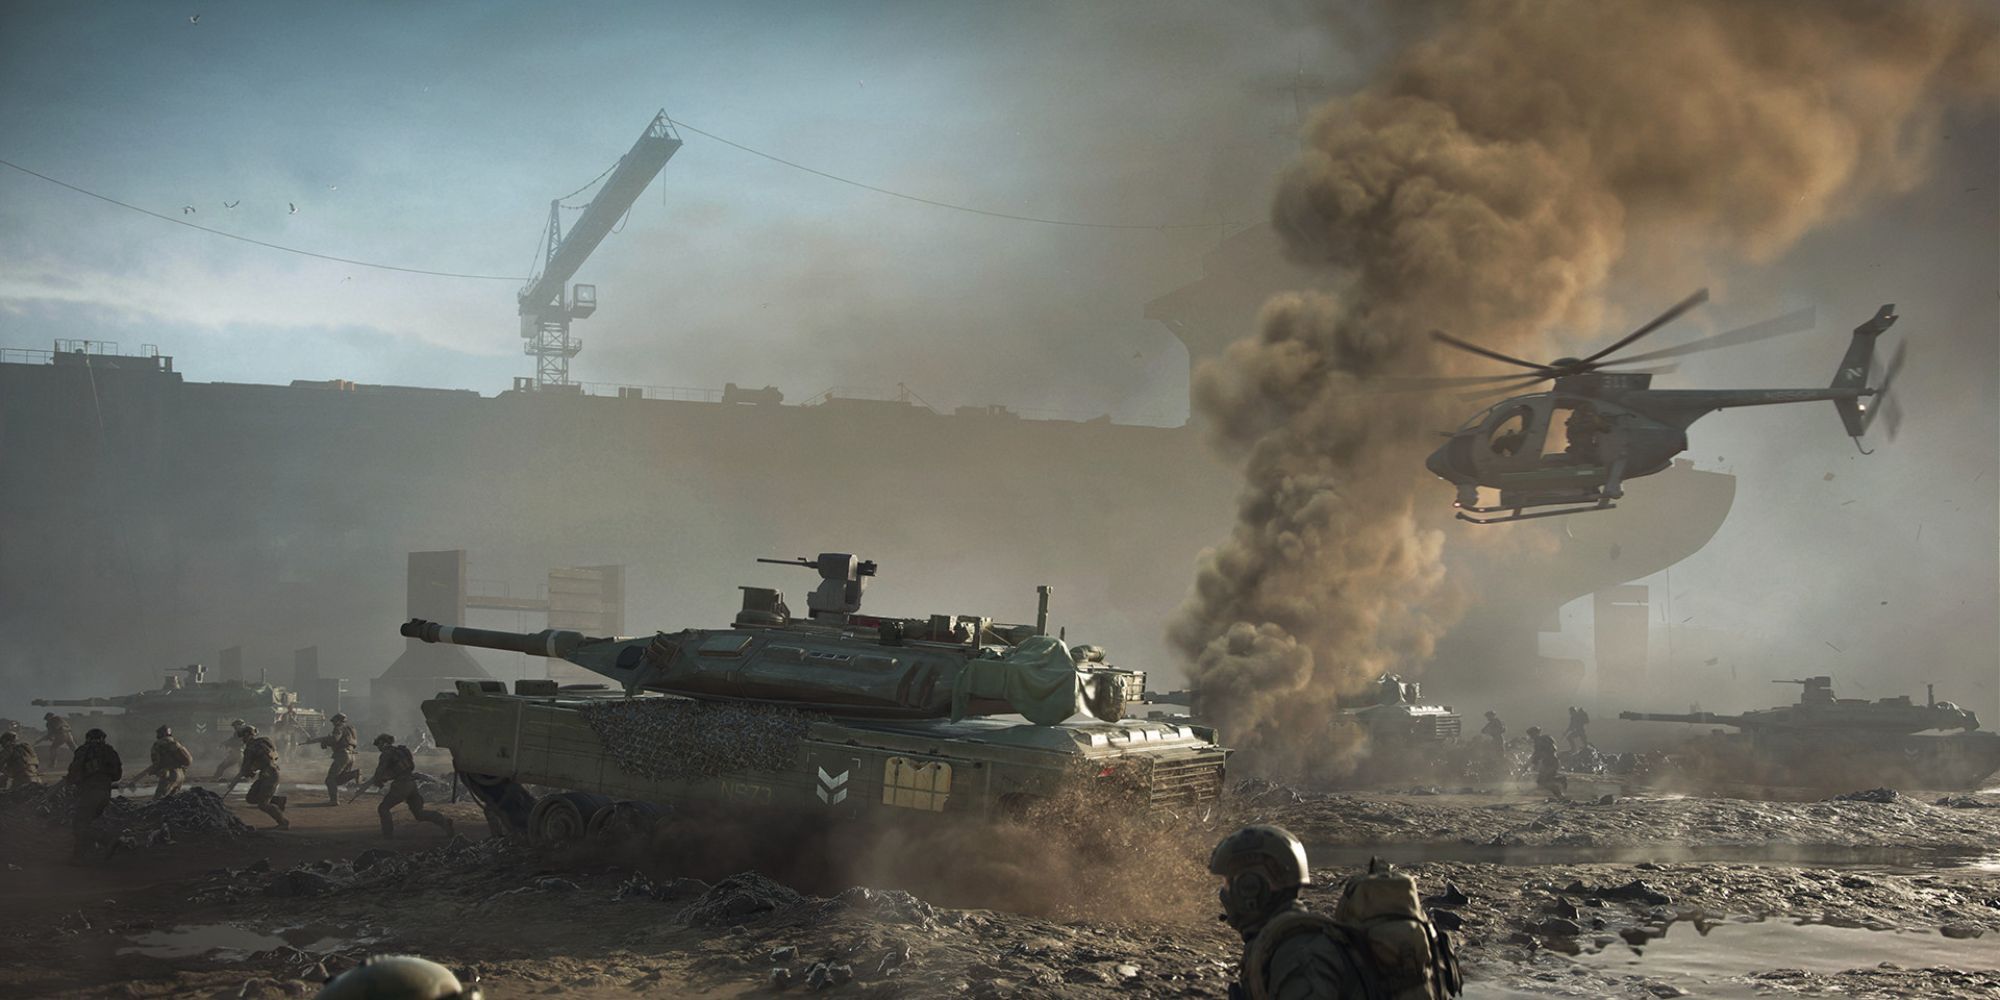 A scene from Battlefield 2042 showing an army advancing. There are soldiers, tanks and a helicopter.